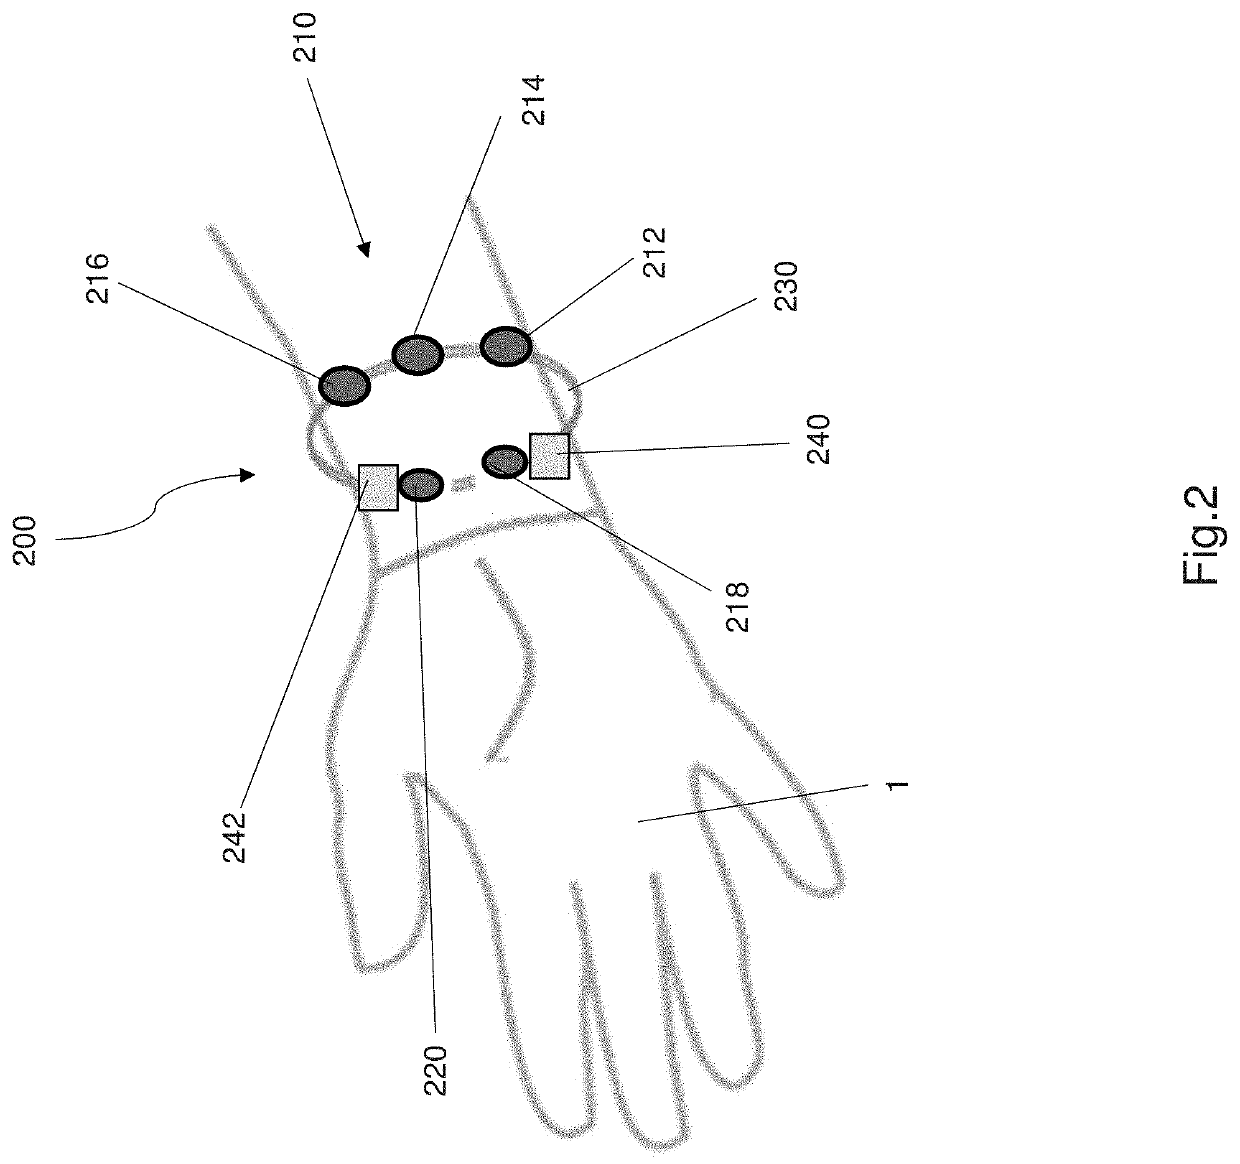 Gesture recognition apparatus and components thereof